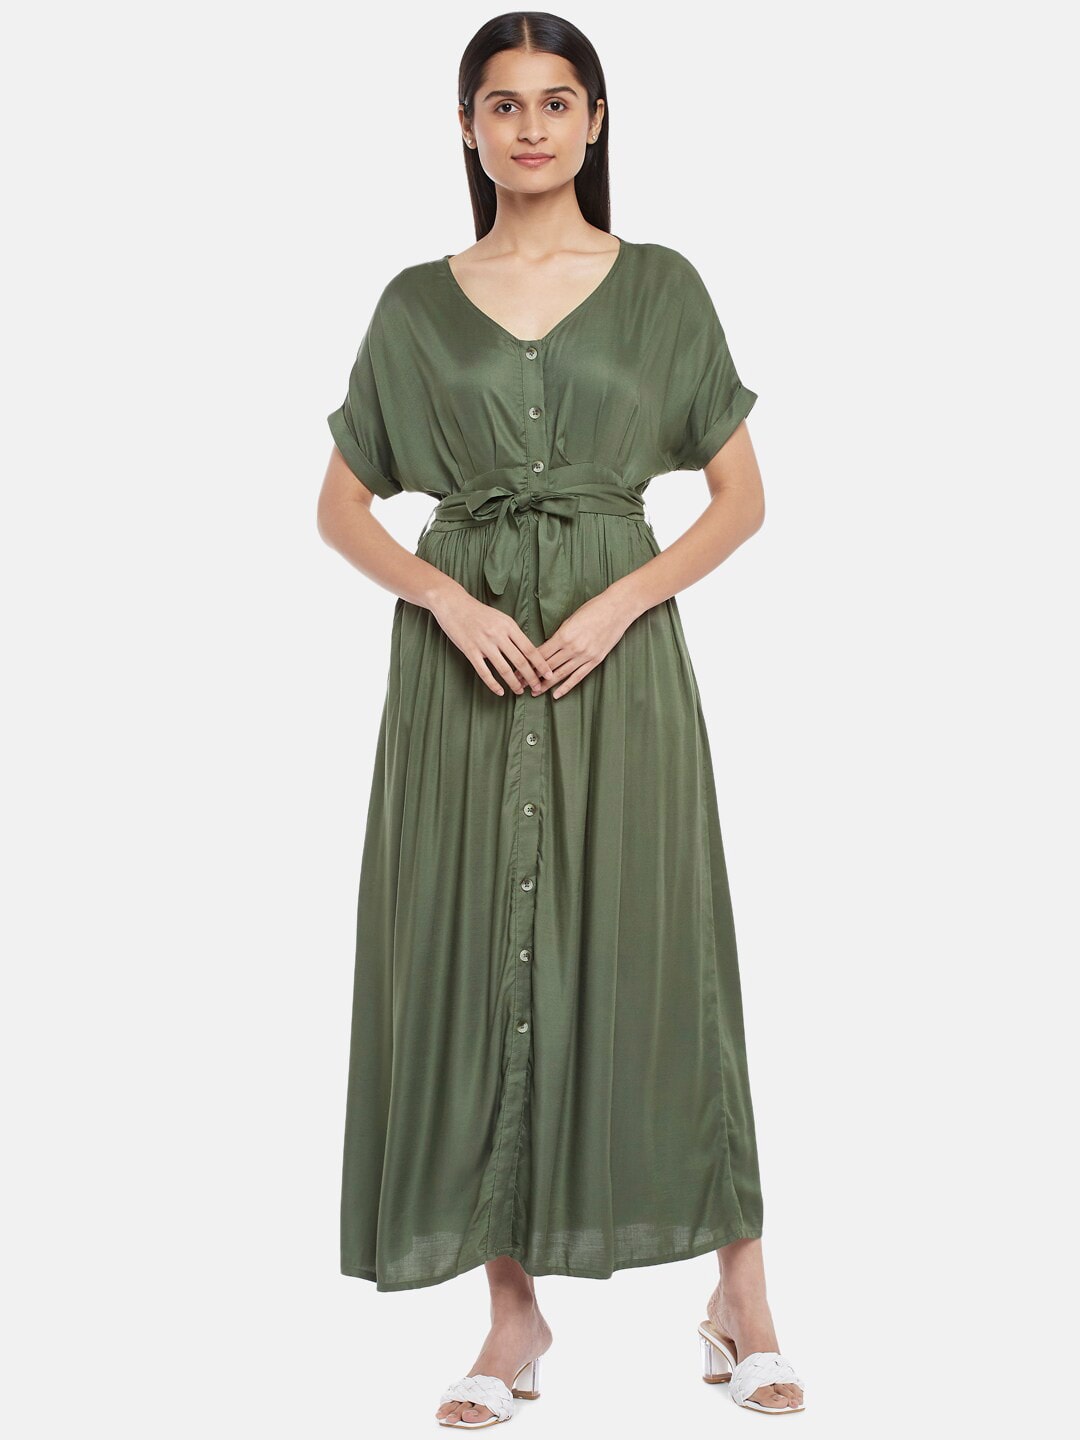 Honey by Pantaloons Olive Green Maxi Dress Price in India